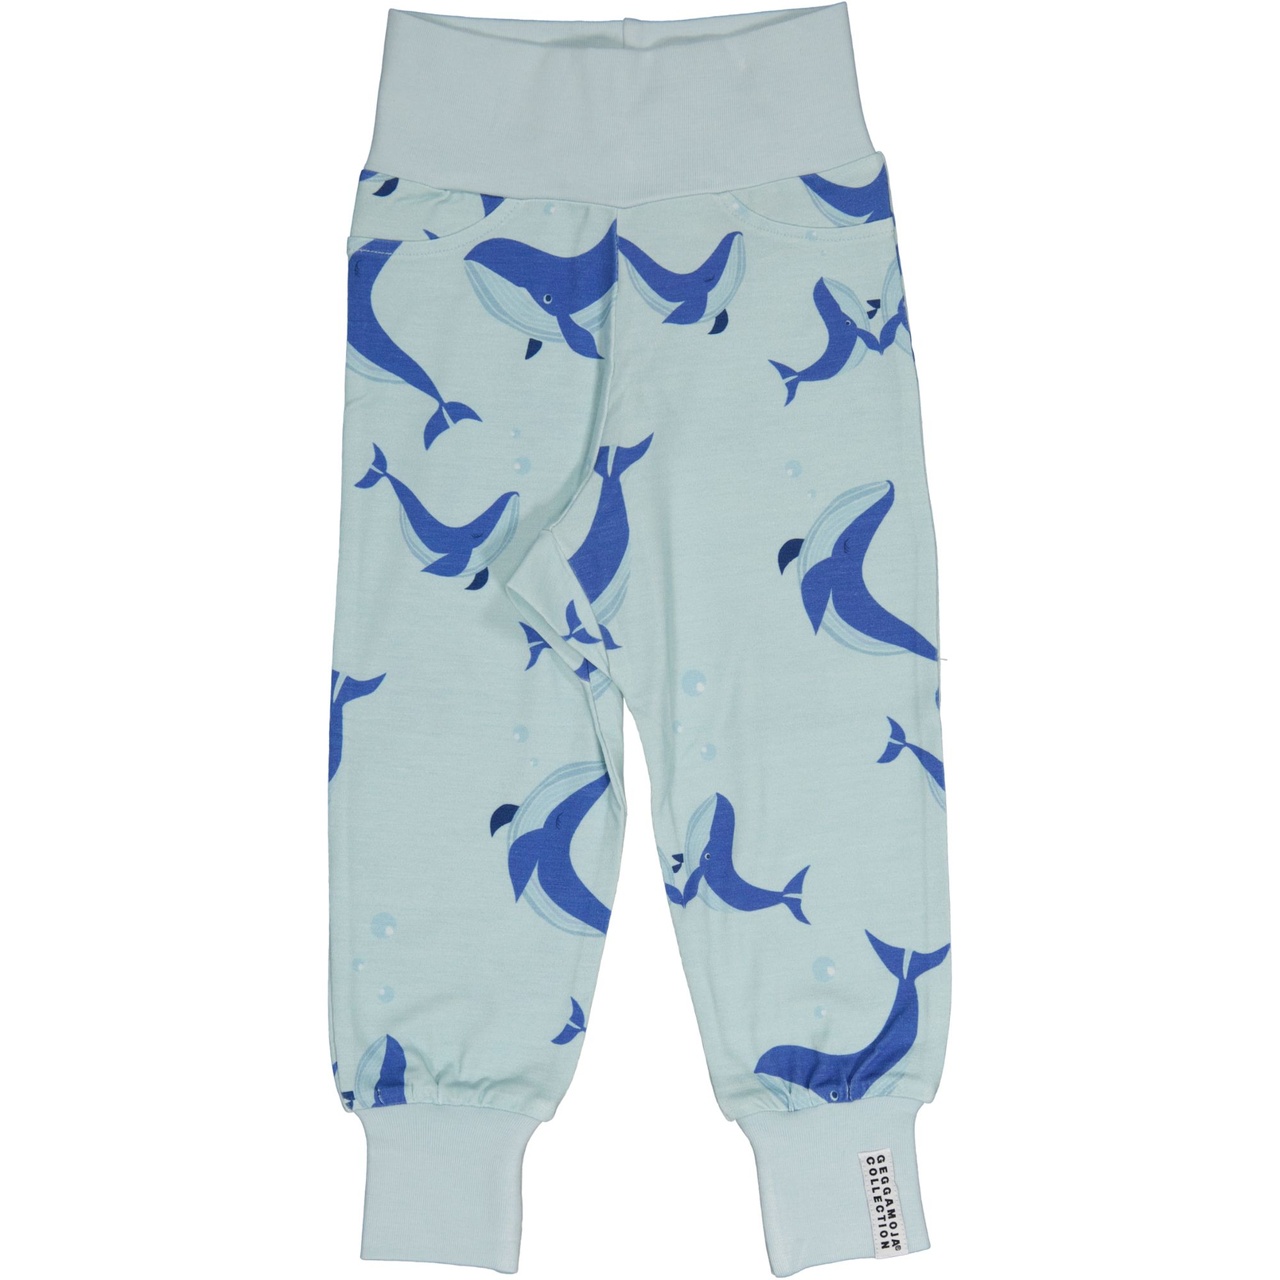 Bamboo Baby pants L.blue whale  74/80